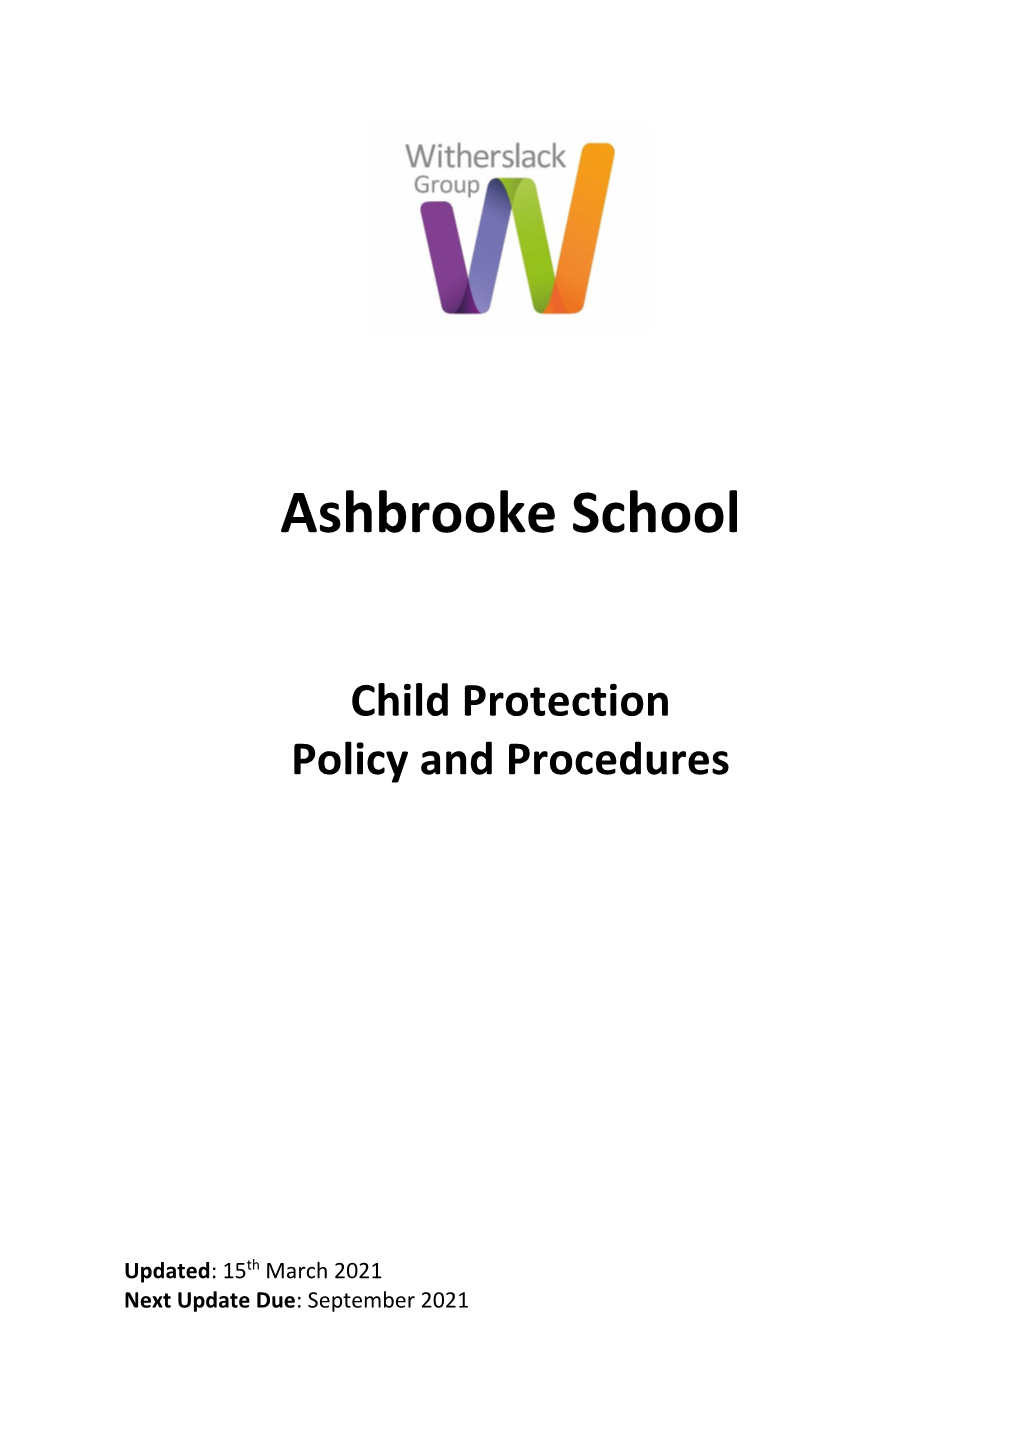 Ashbrooke School Child Protection Policy and Procedures